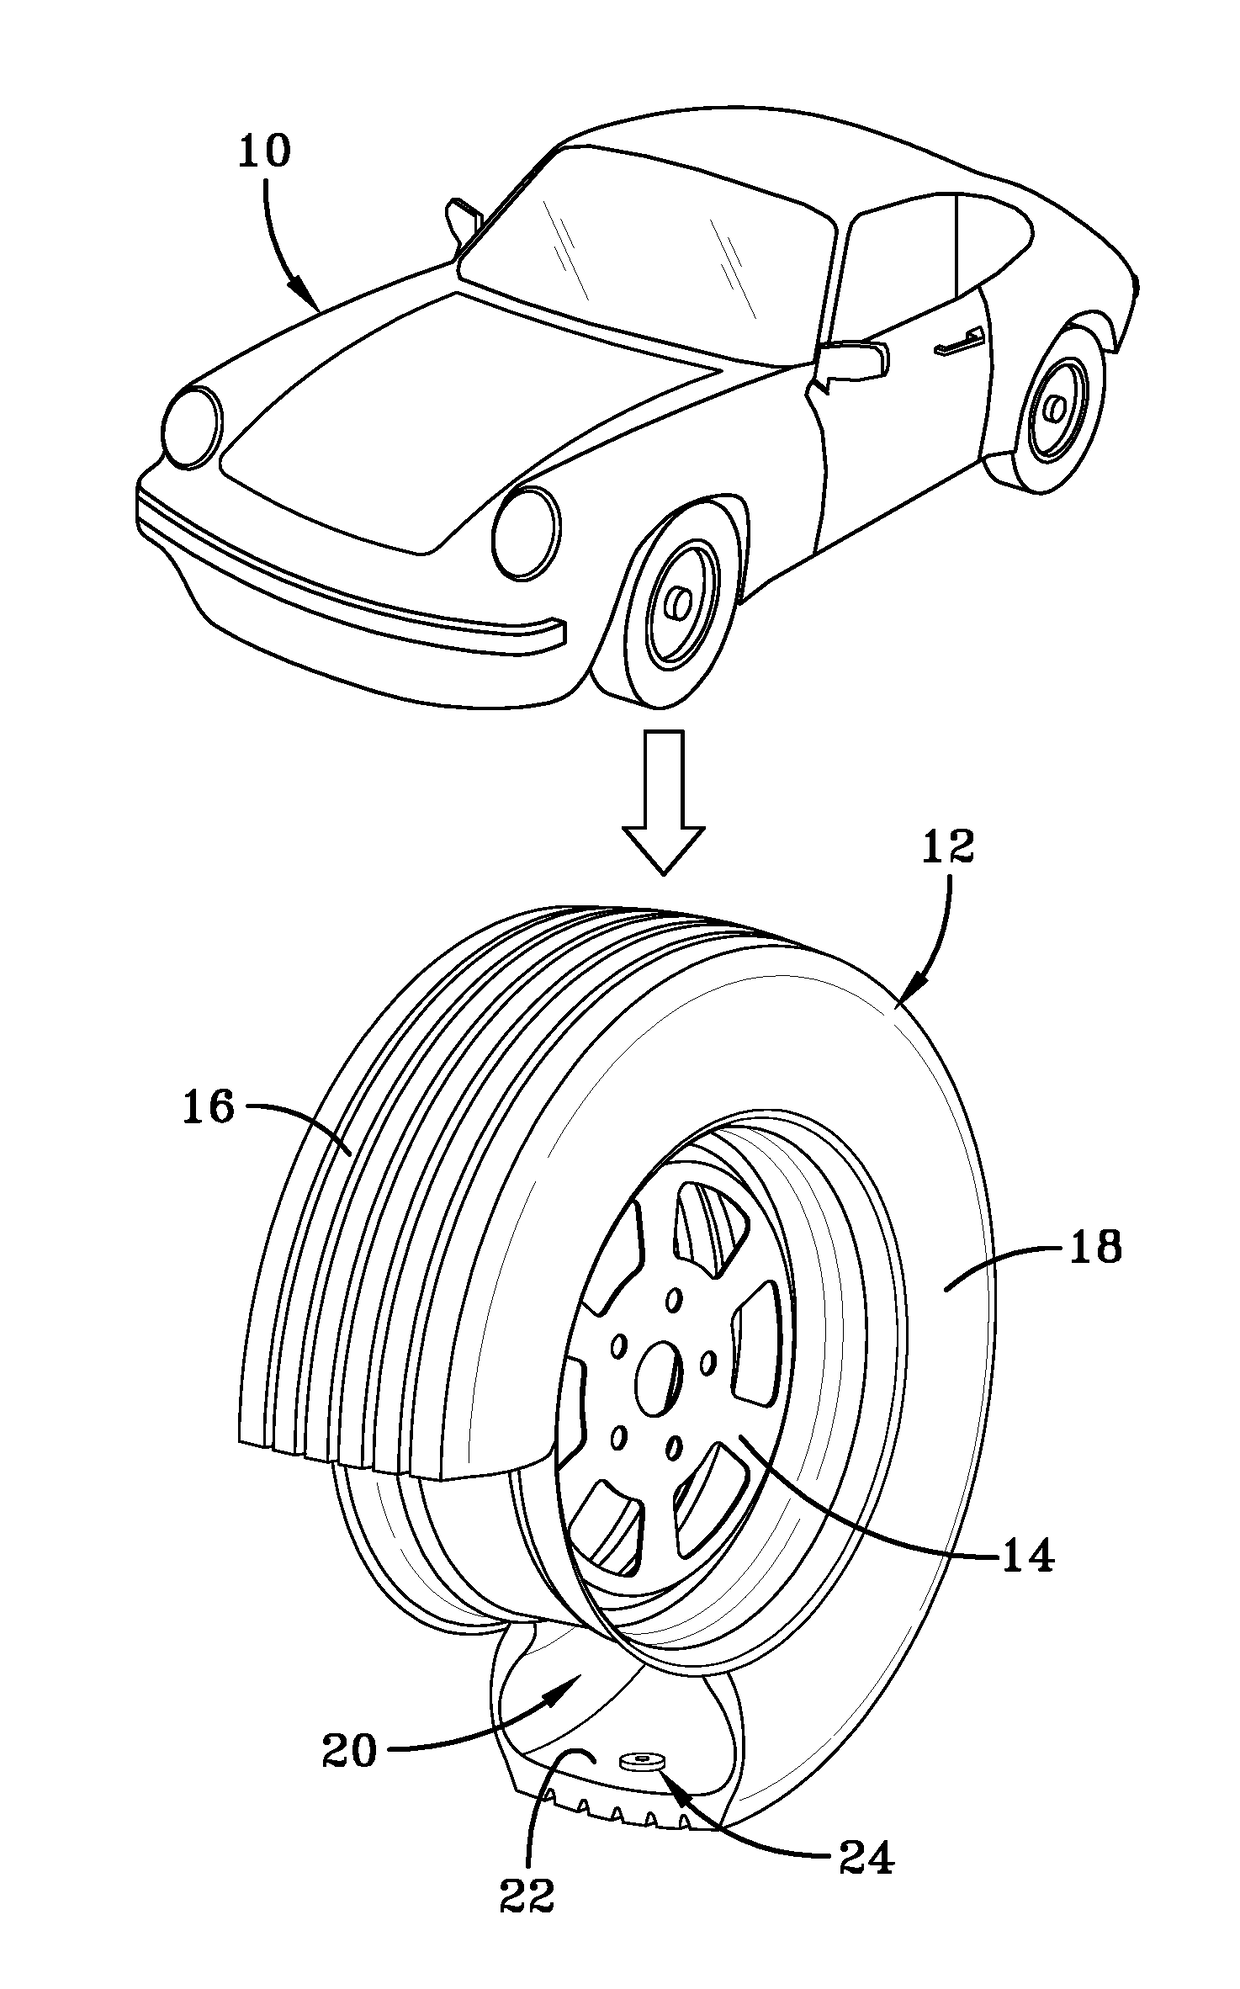 Tire sensor-based robust road surface roughness classification system and method